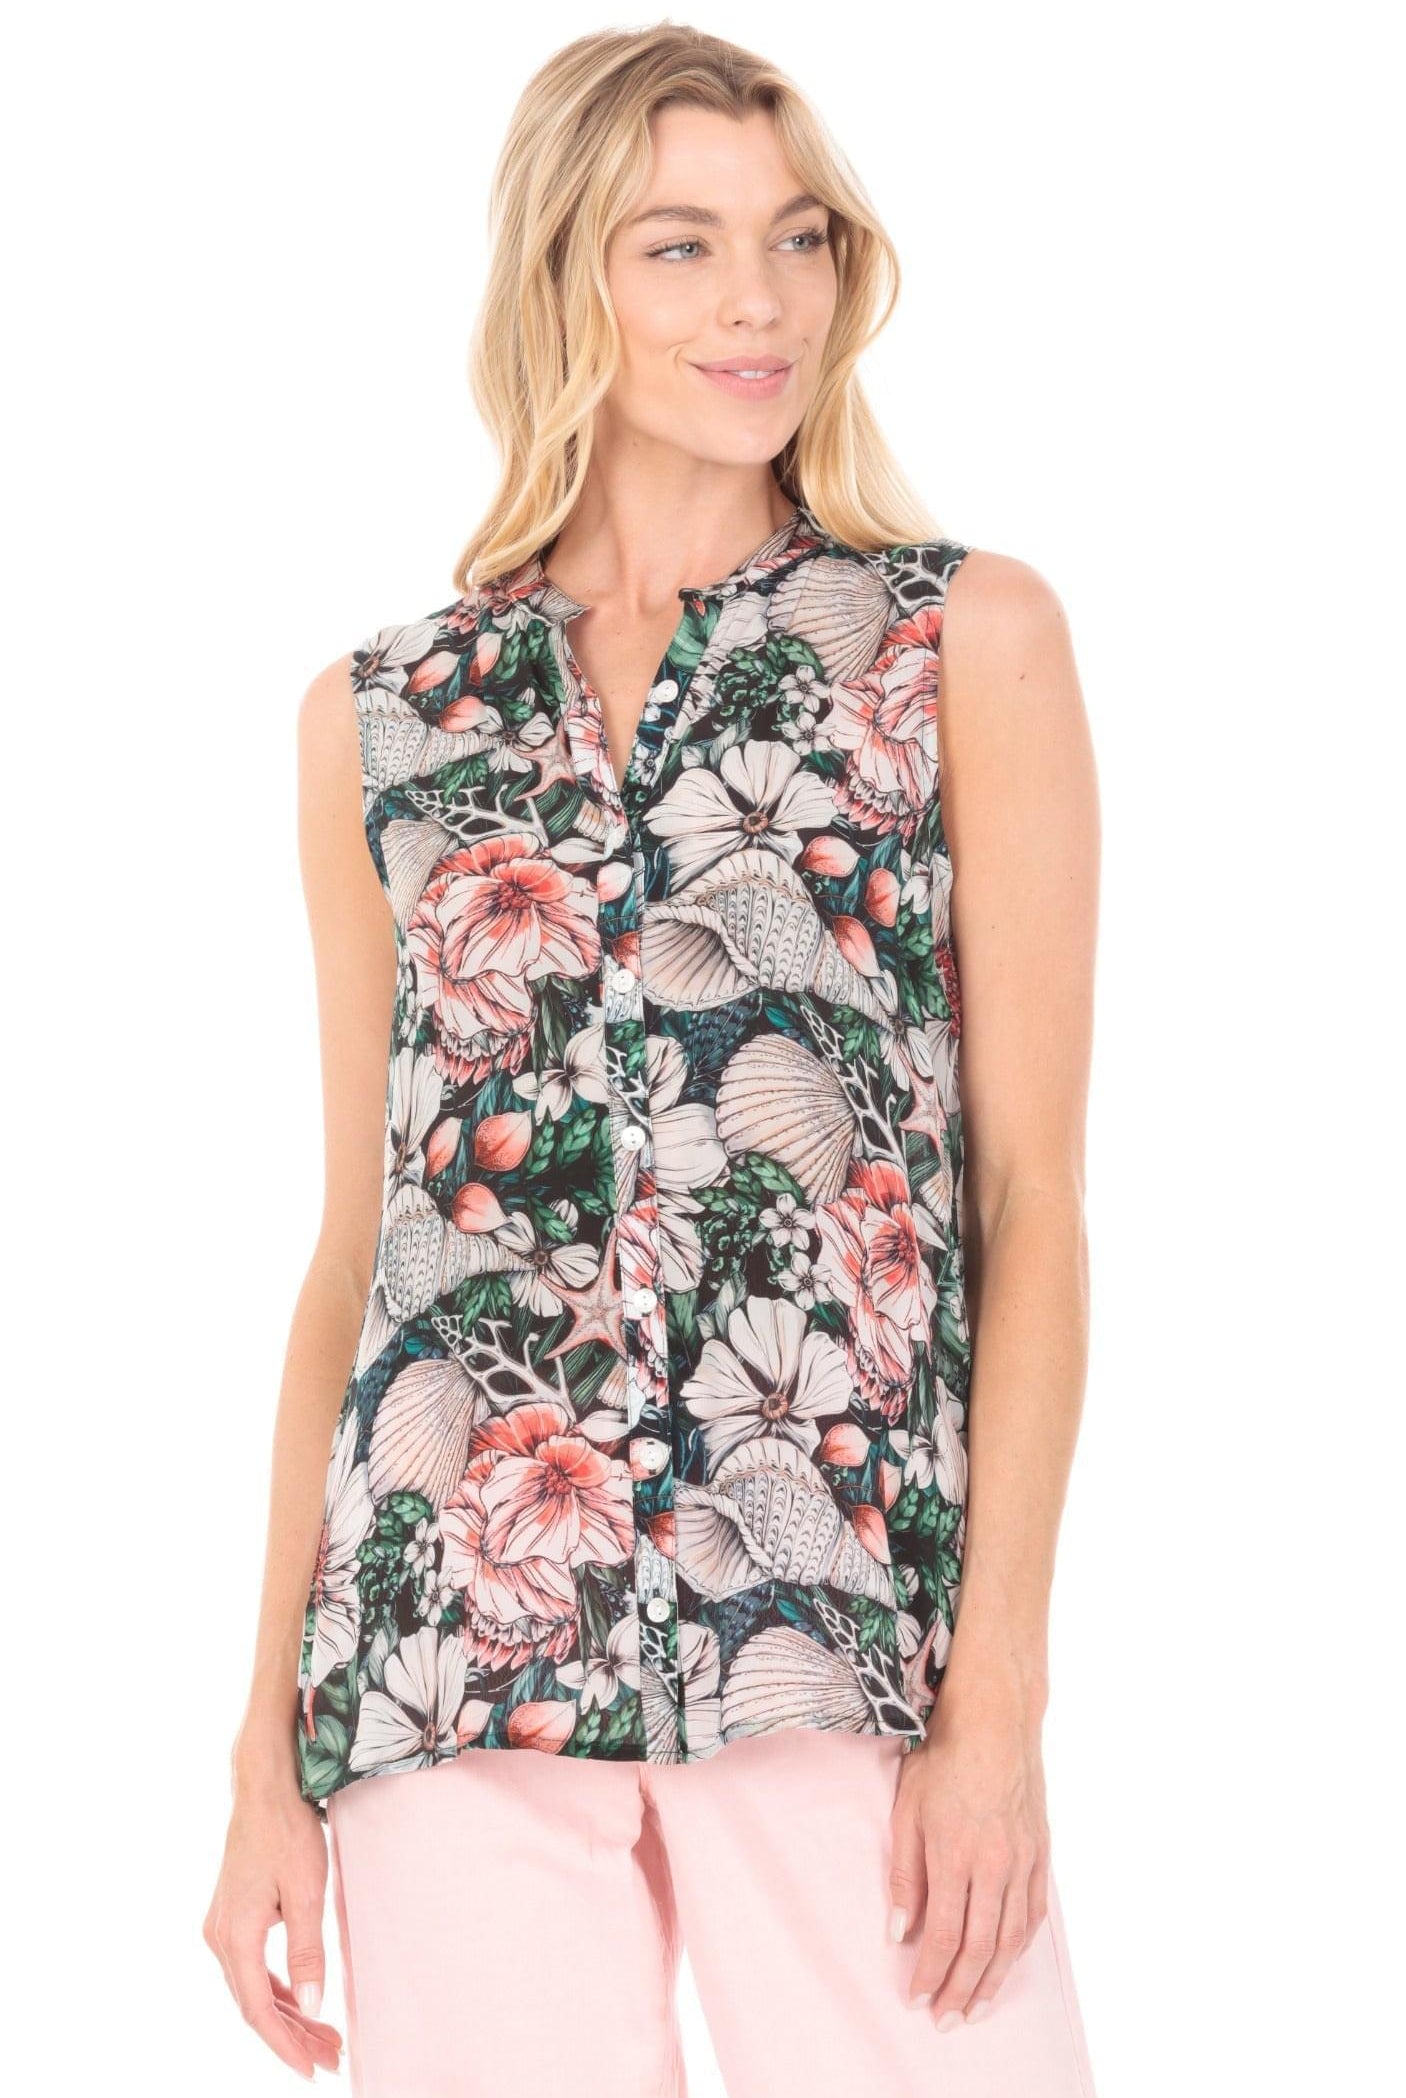 Button up tank flower-print Front APNY